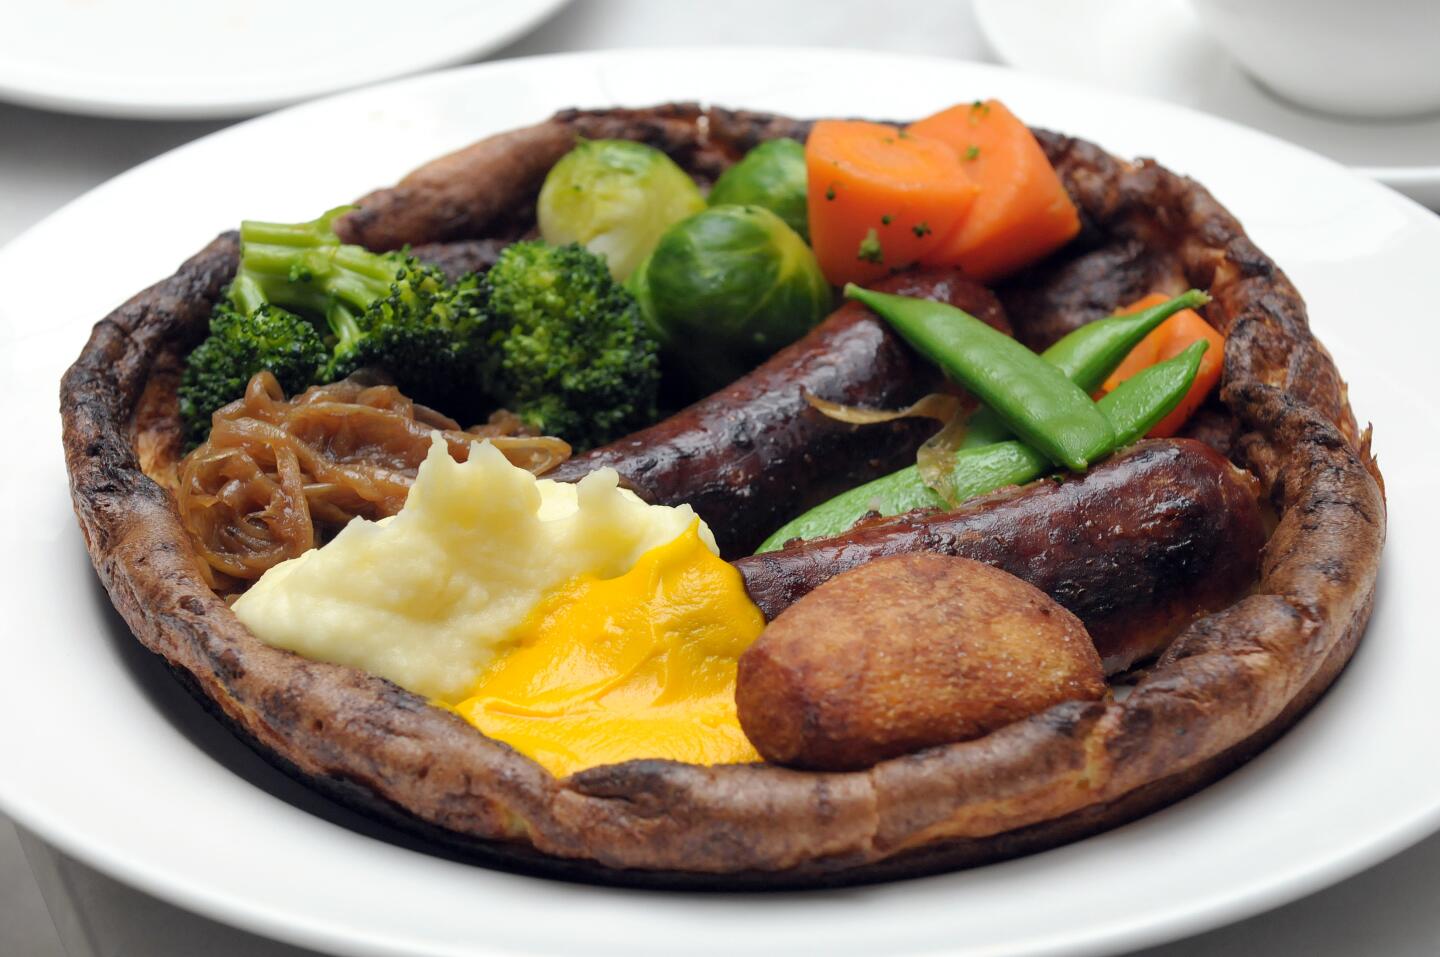 A toad in the hole at Palihouse's Sunday roast.